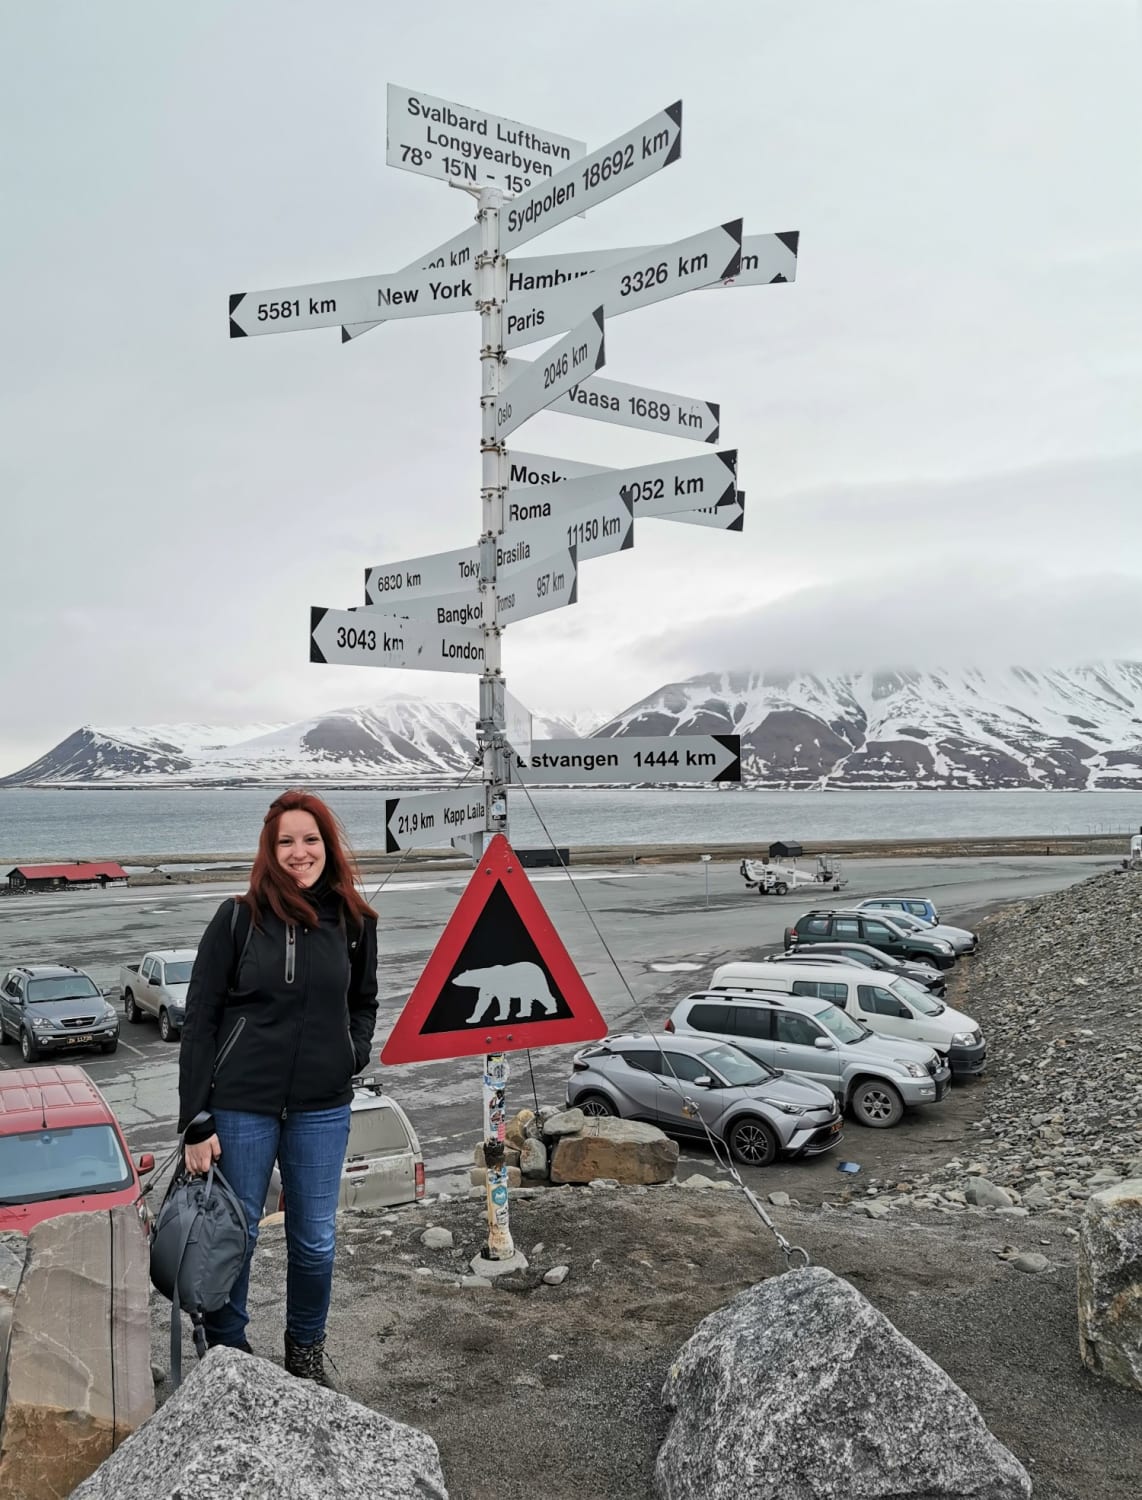 Arriving to Svalbard